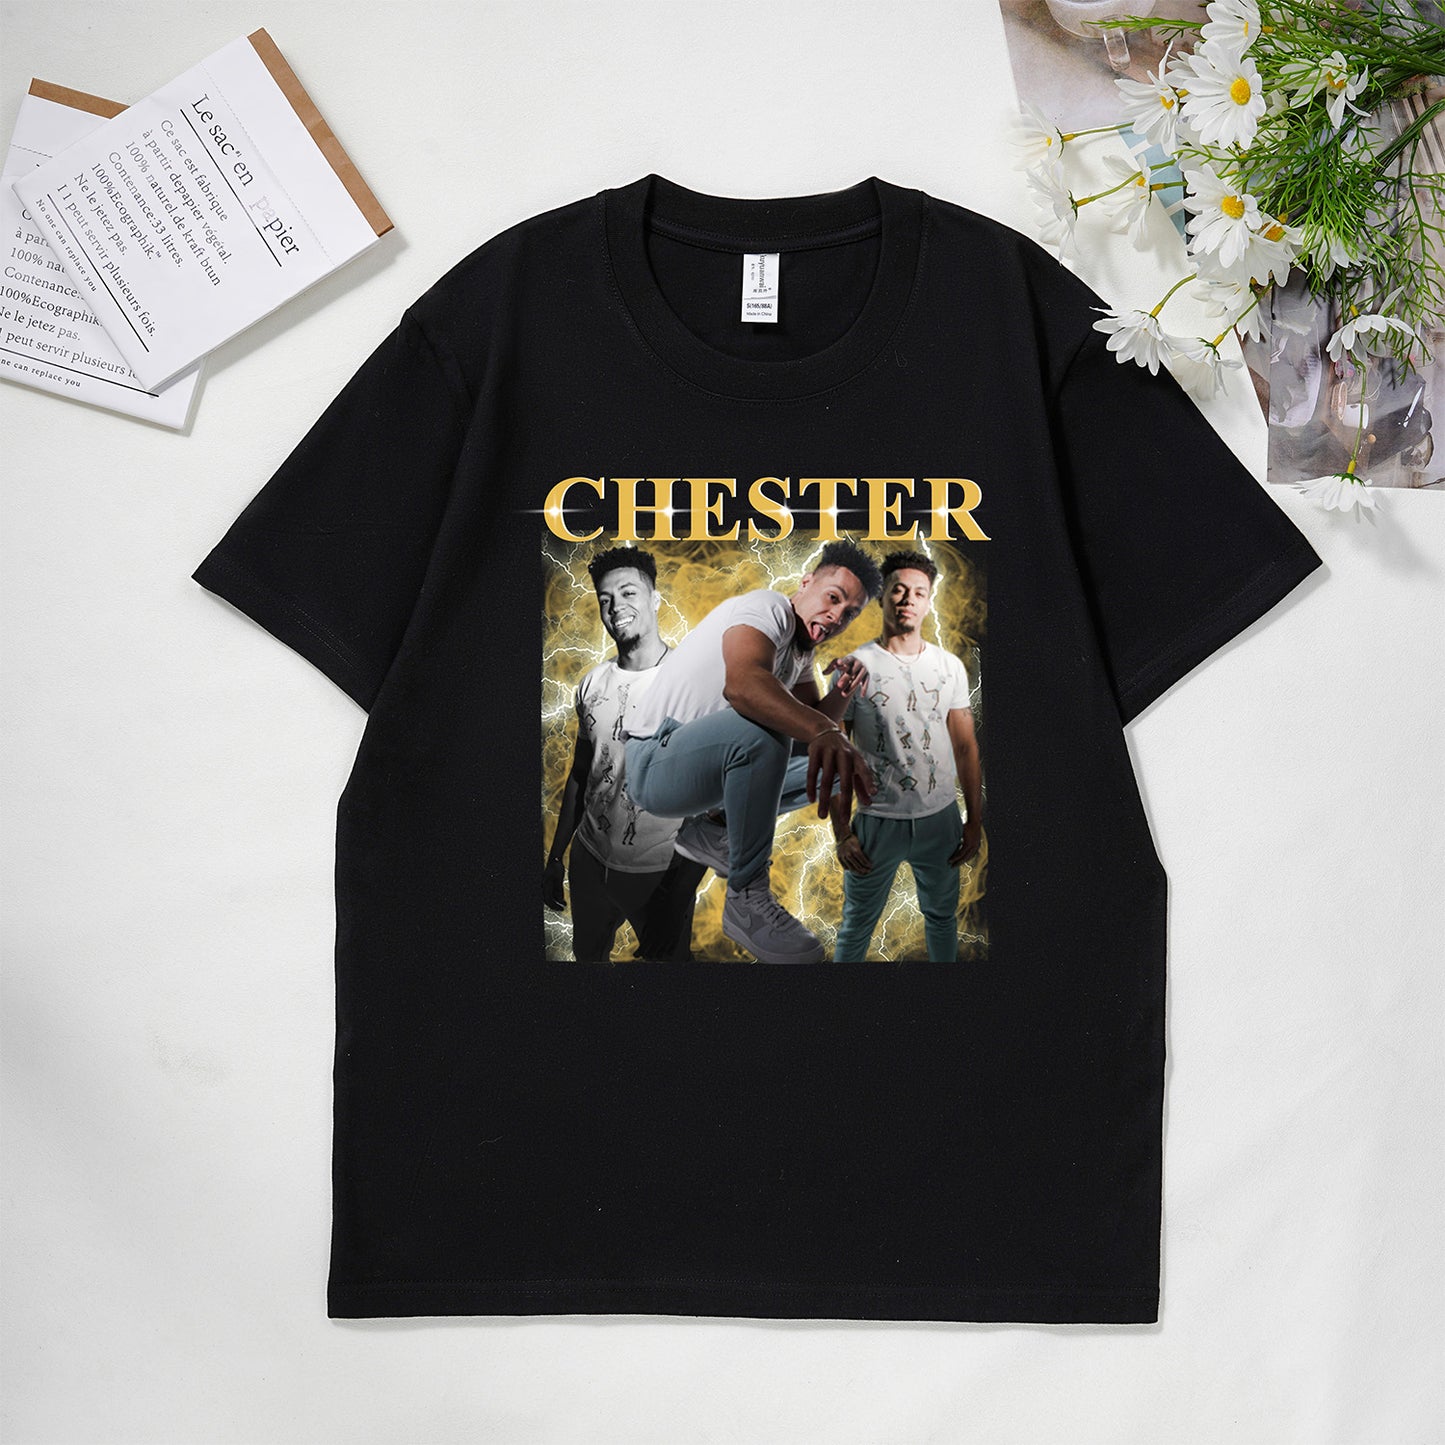 Customized Photo Printed T-shirt/Sweatshirt - Gift for Family Members, Pet Lovers